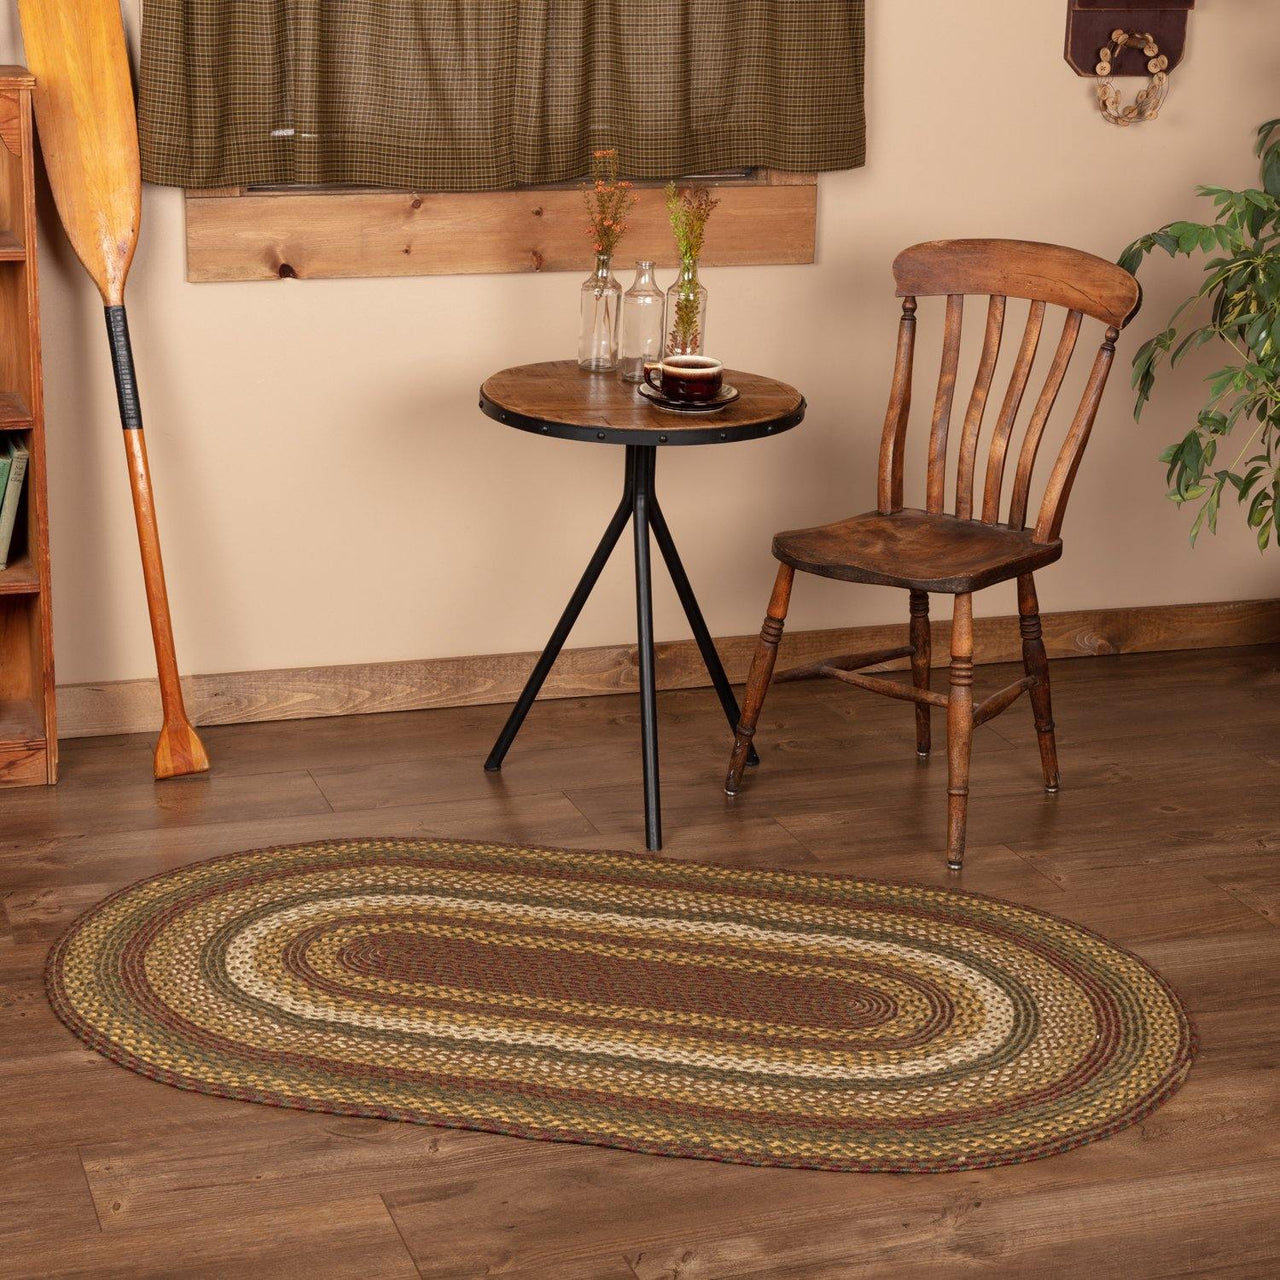 Tea Cabin Jute Braided Rug Oval 3'x5' with Rug Pad VHC Brands - The Fox Decor